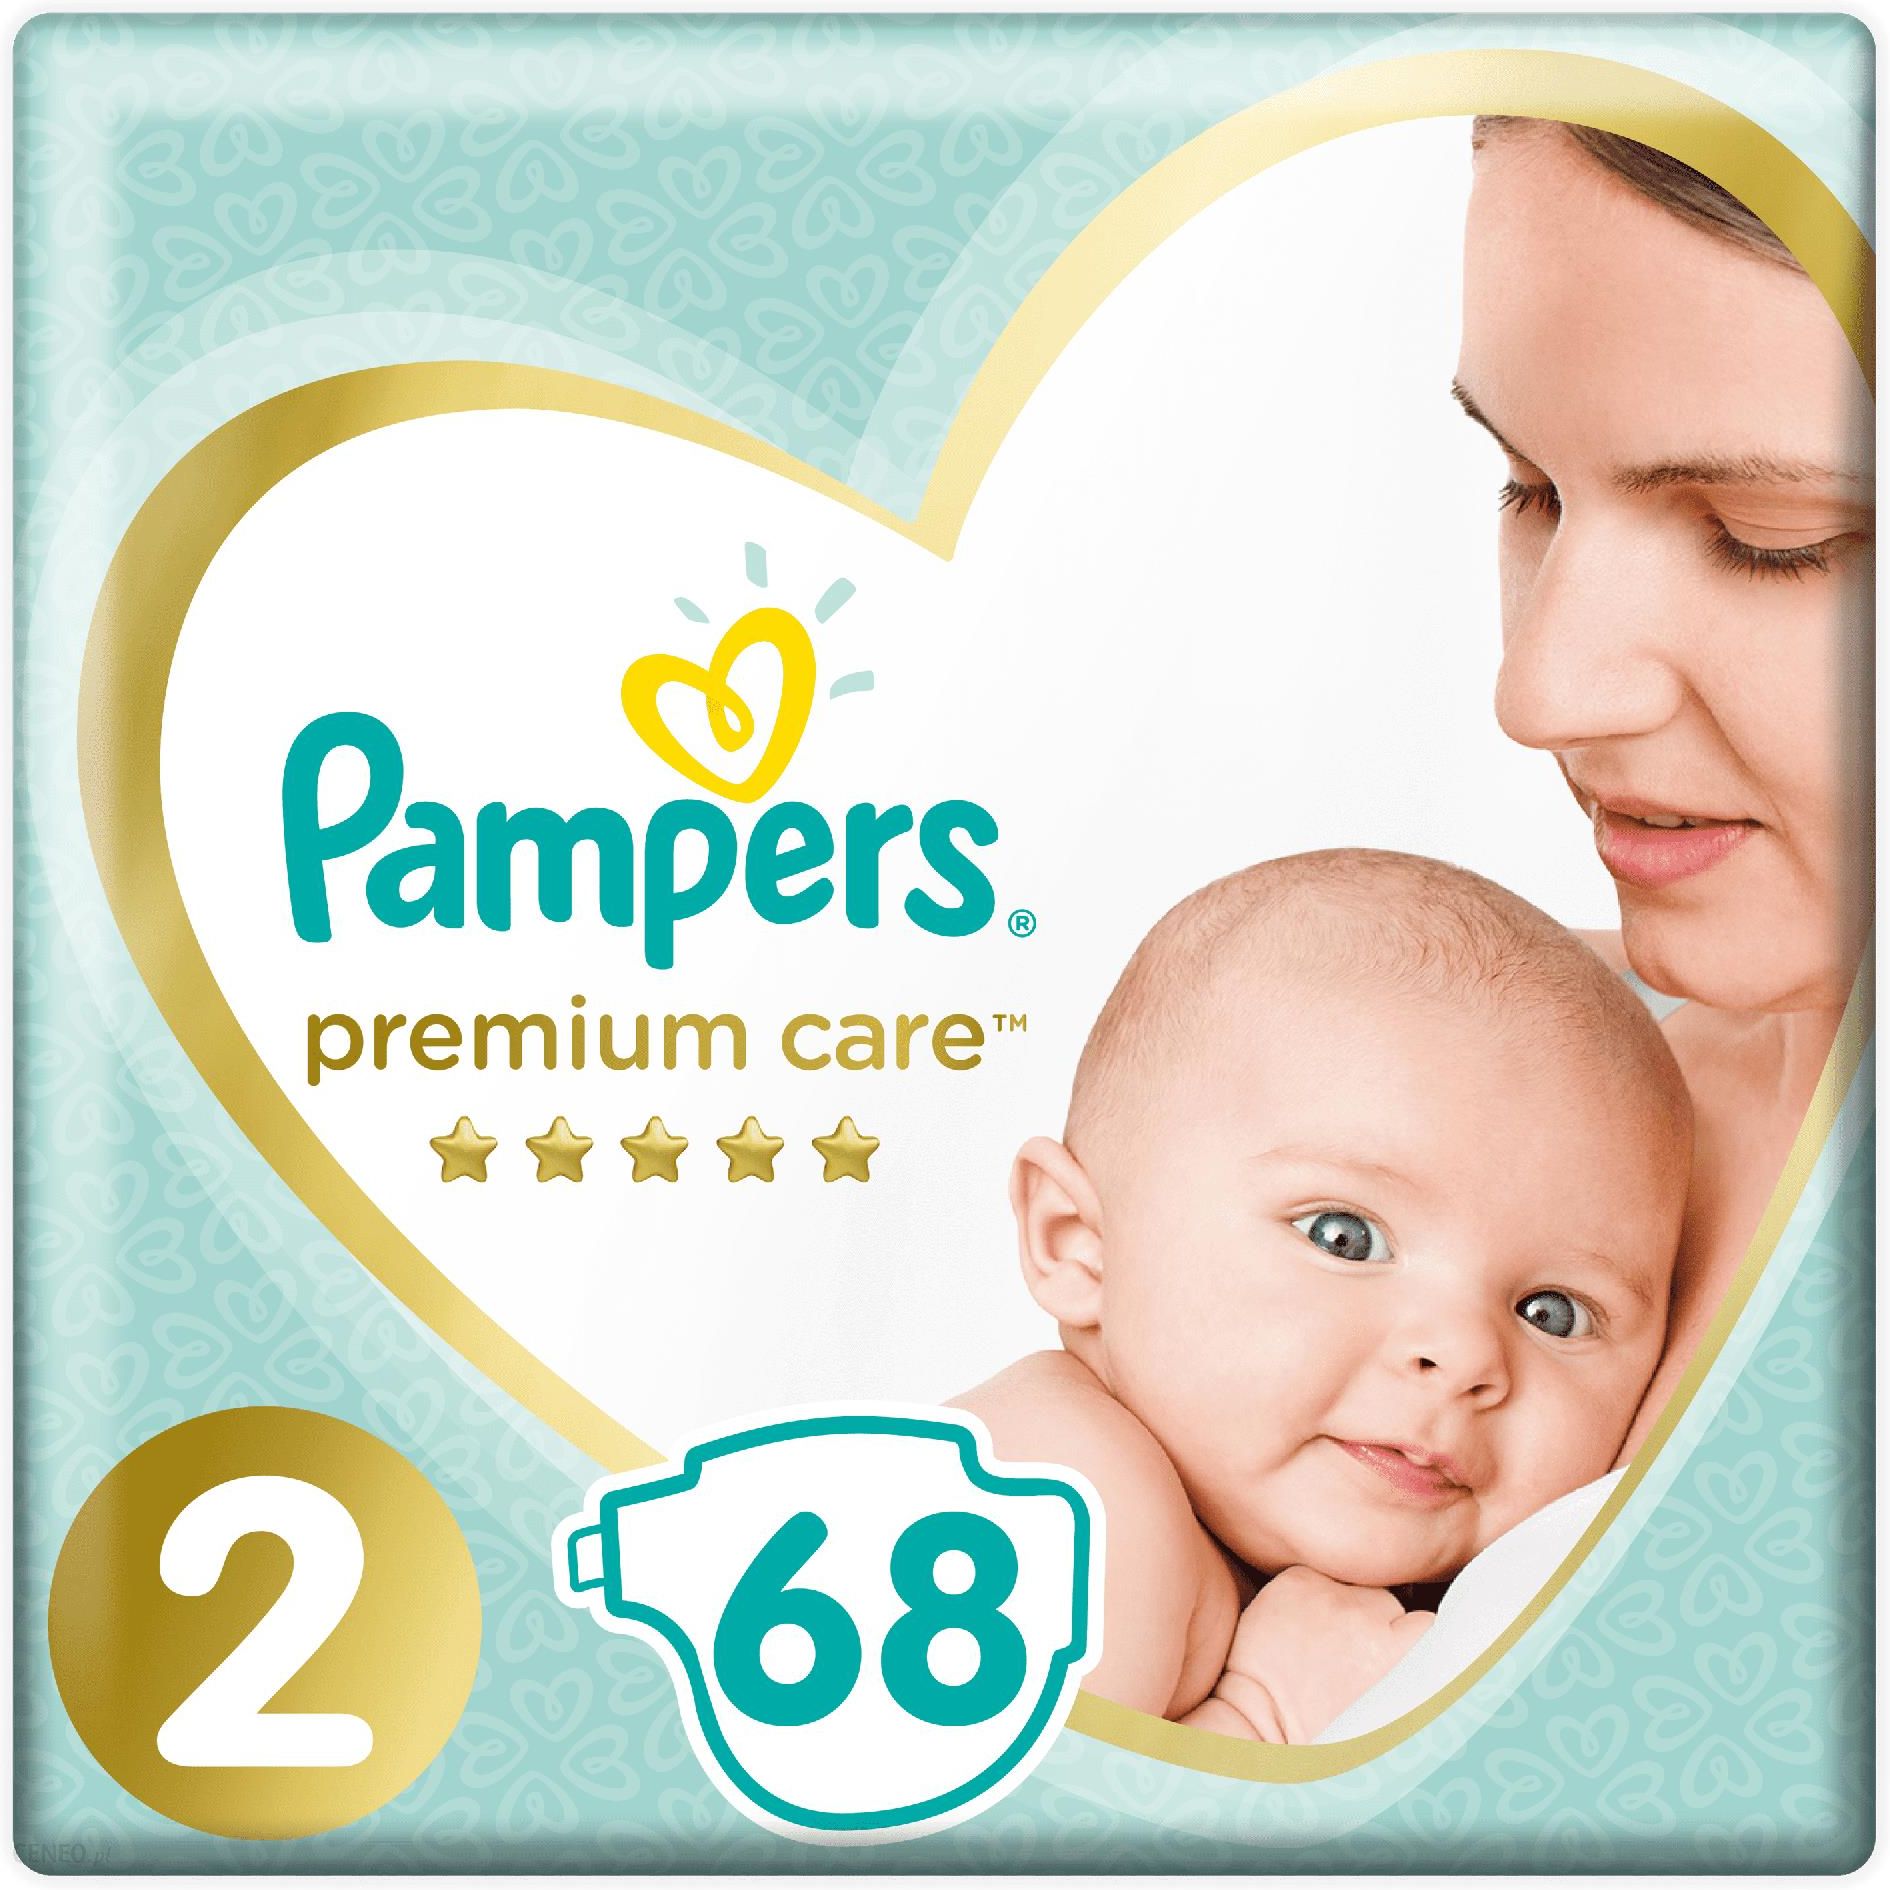 pampers giant pack 3 ceneo